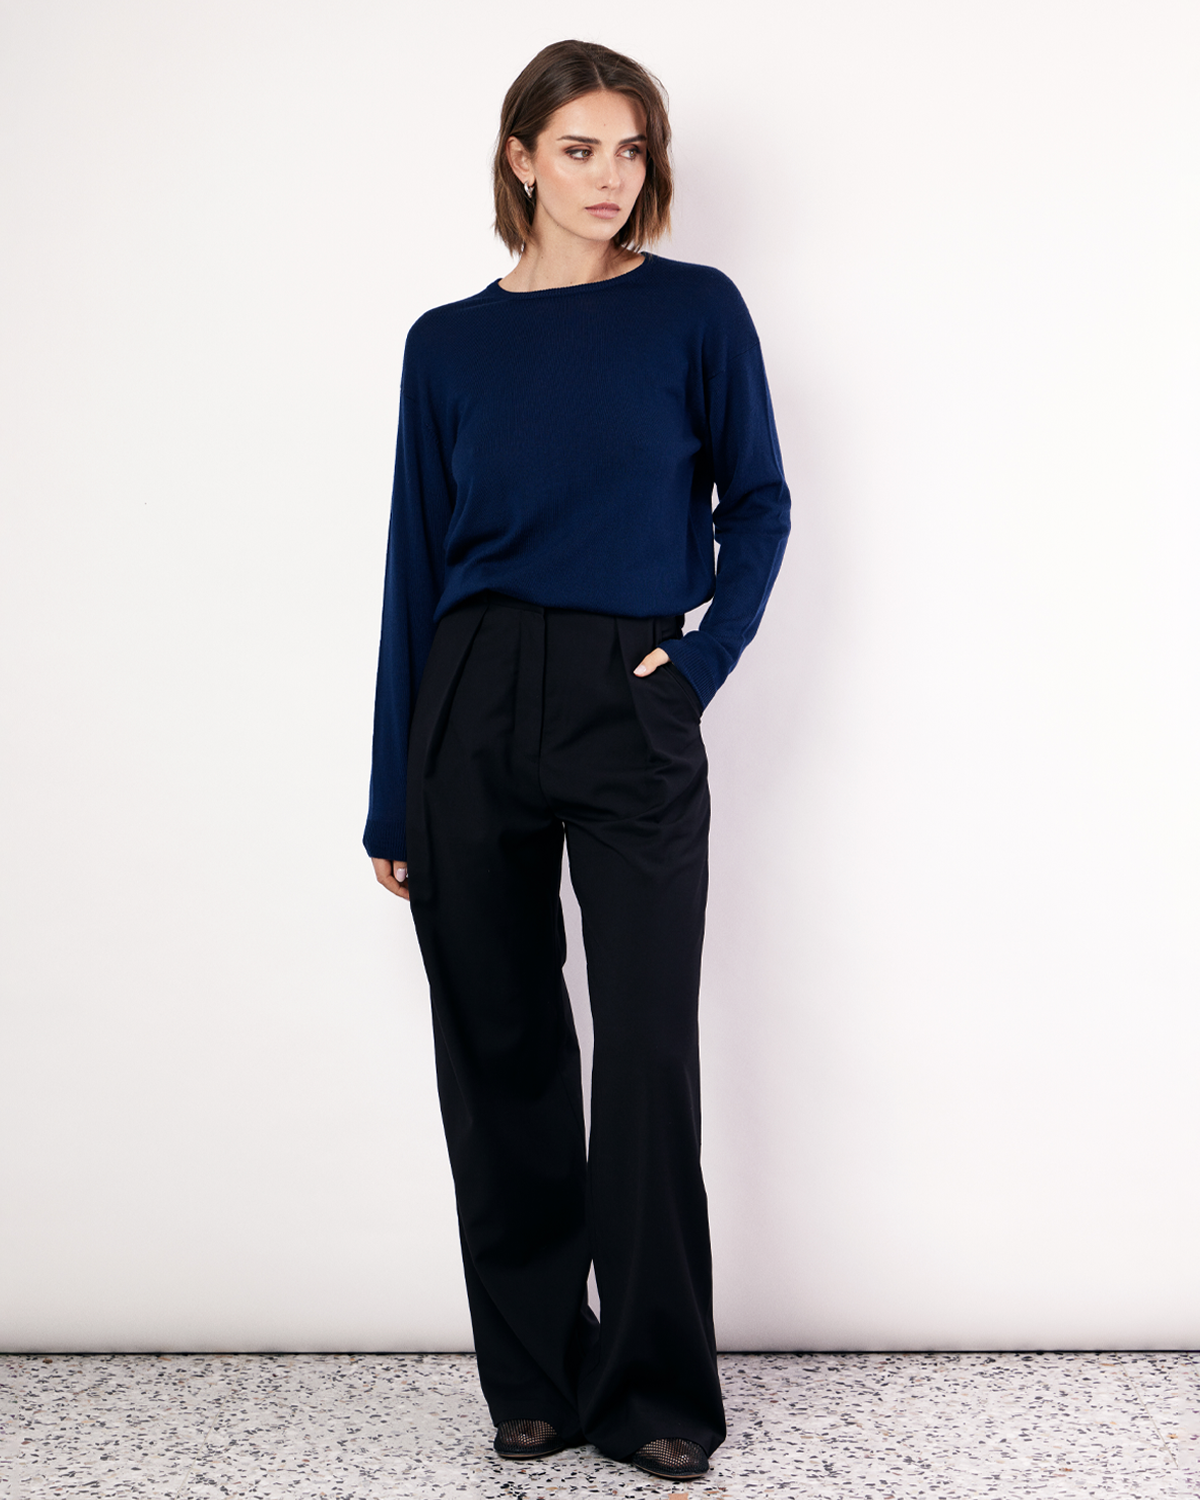 The Crew Neck Sweater is an everyday lightweight knit, featuring ribbed collar, cuff and hem detailing. It is crafted from 100% Extra Fine Merino Wool in Navy. Now available at Romy. 